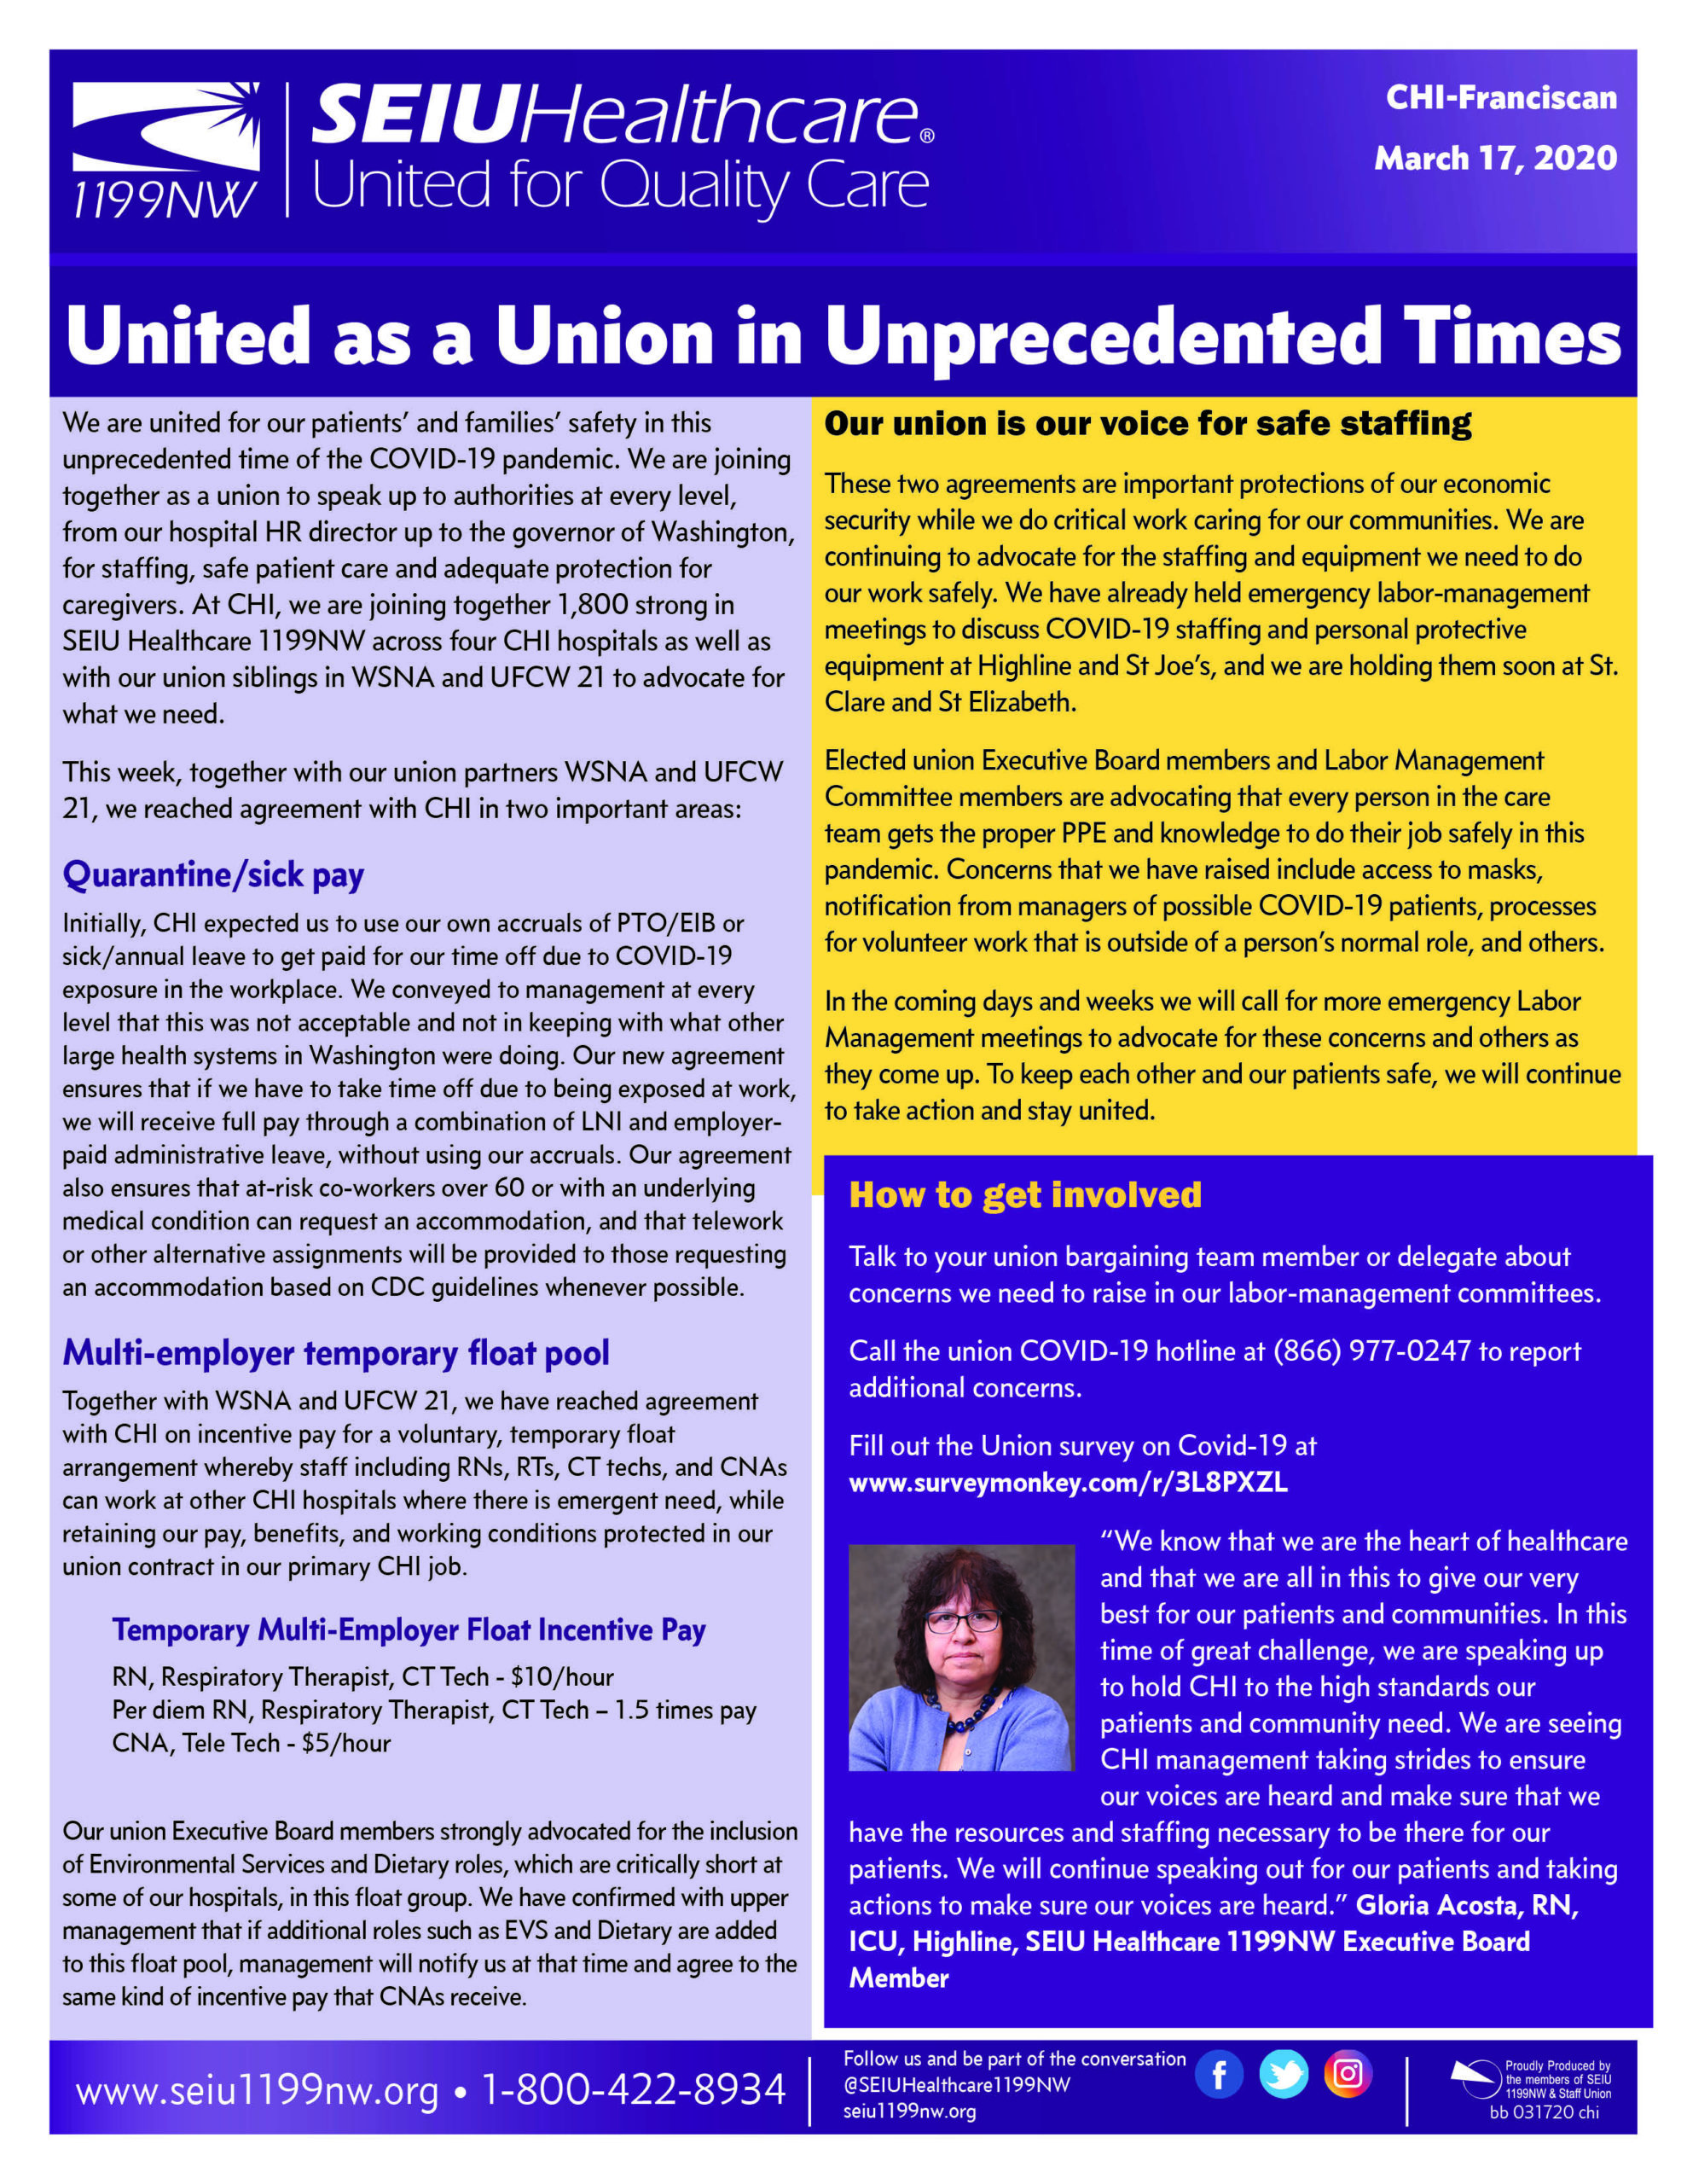 United as a Union in Unprecedented Times